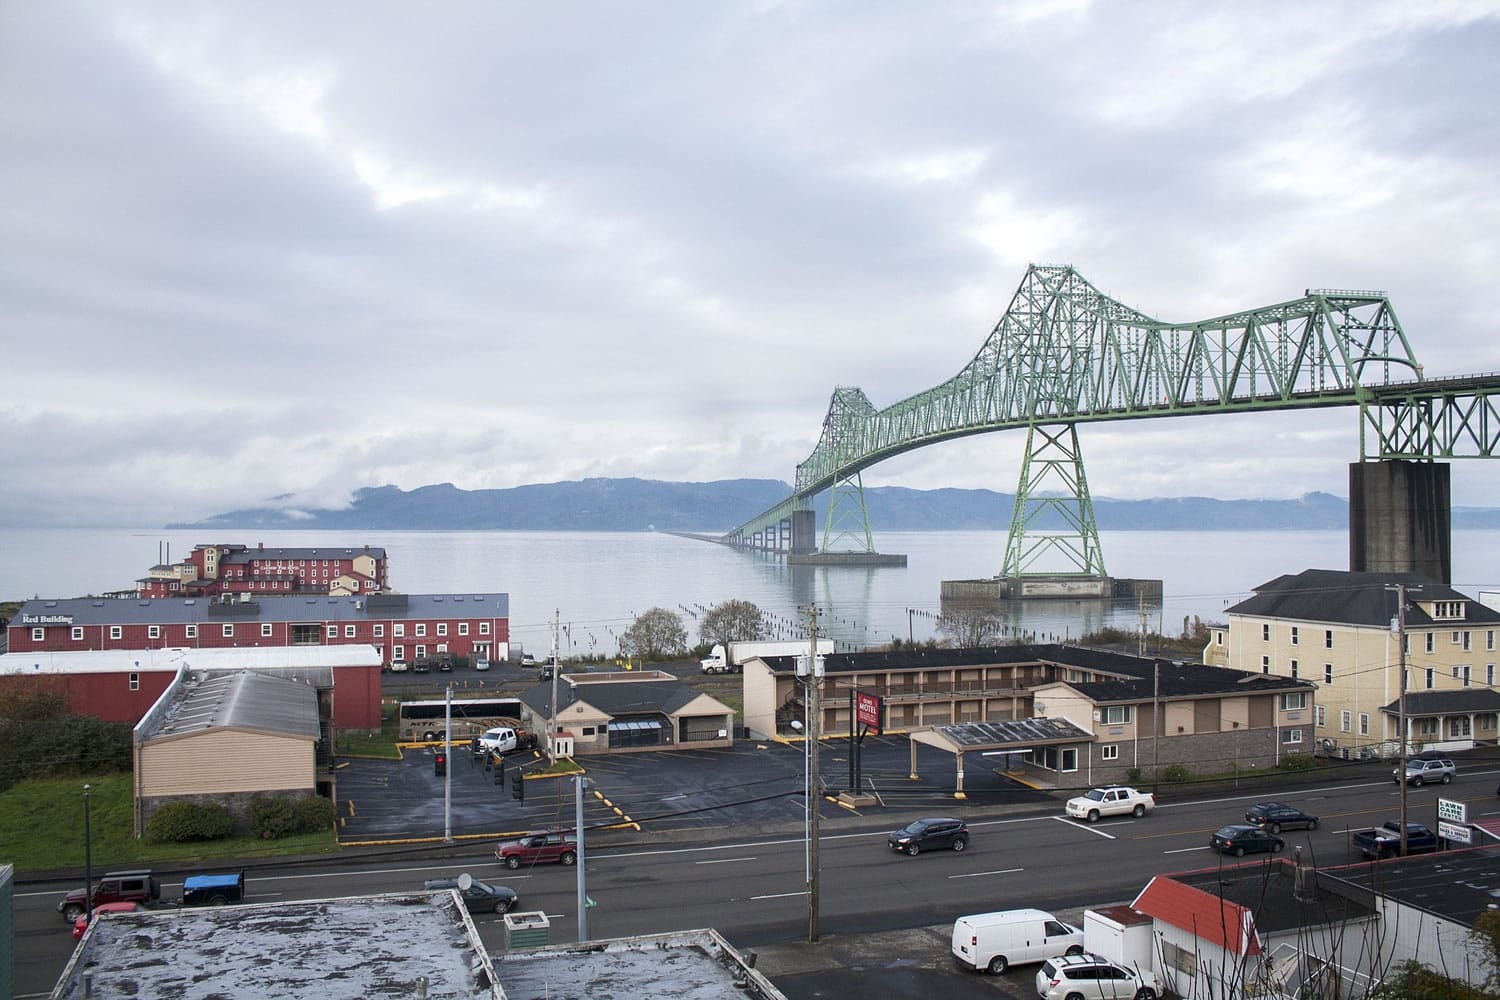 Daily Astorian files
A portion of the Uniontown waterfront is viewed in Astoria, Ore., on Nov. 26, 2014. The Astoria City Council has agreed to place new development restrictions in Uniontown.